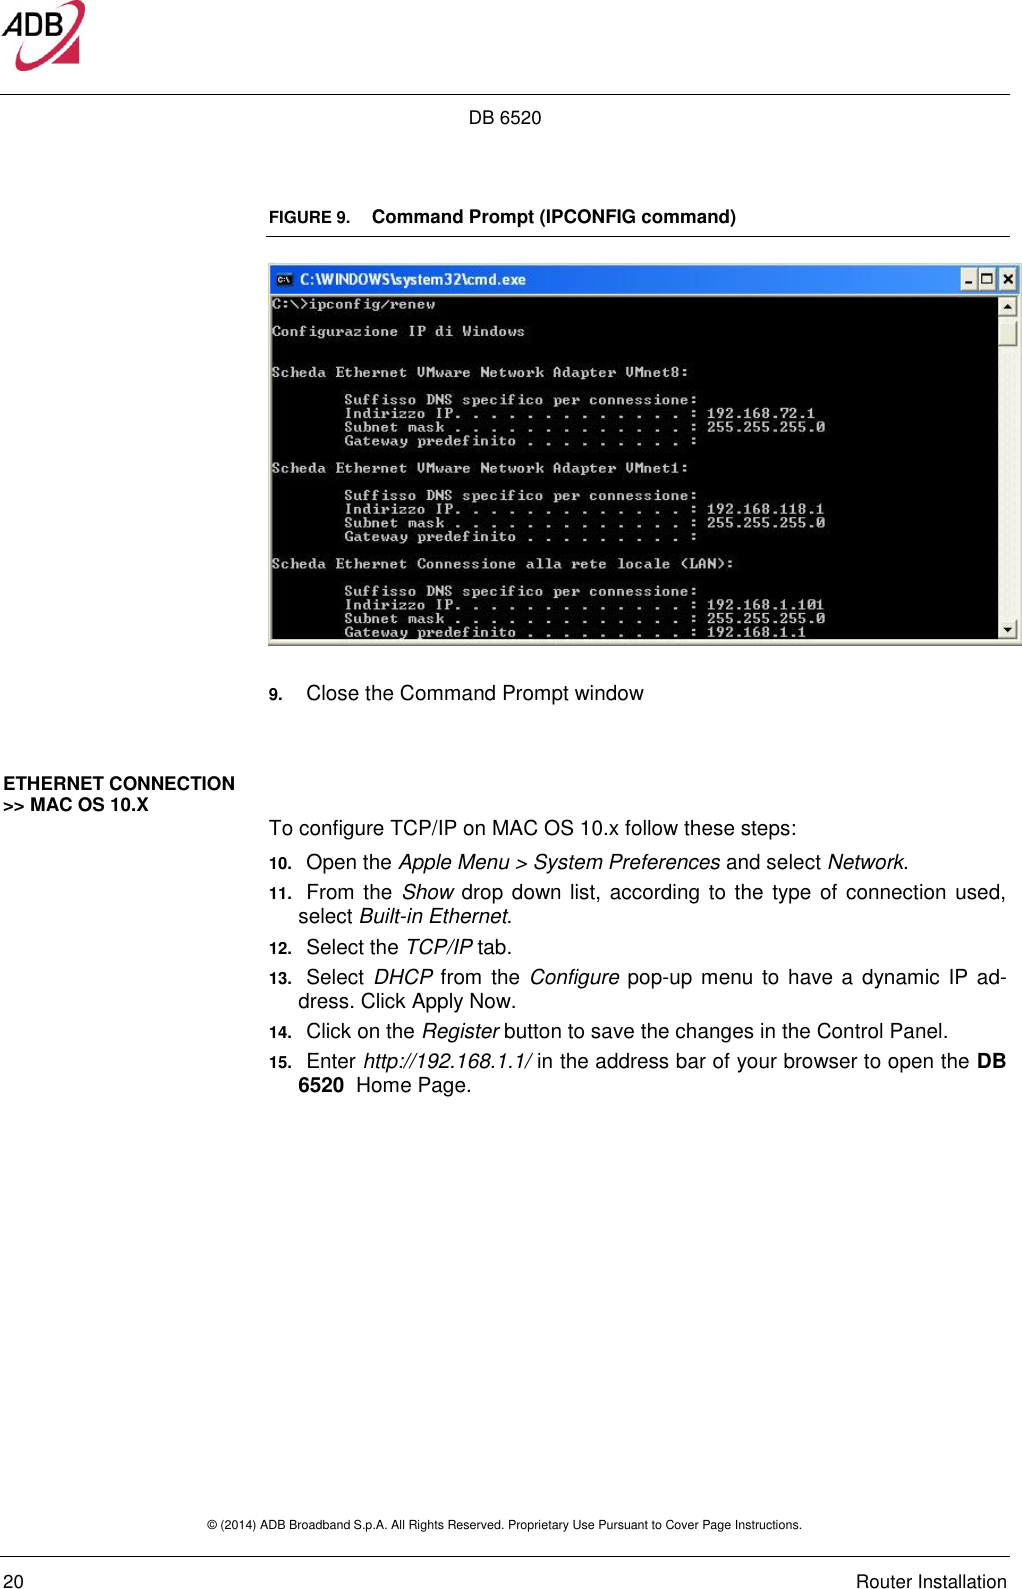 DB 6520 © (2014) ADB Broadband S.p.A. All Rights Reserved. Proprietary Use Pursuant to Cover Page Instructions.   20    Router Installation FIGURE 9.   Command Prompt (IPCONFIG command)   9. Close the Command Prompt window  ETHERNET CONNECTION &gt;&gt; MAC OS 10.X  To configure TCP/IP on MAC OS 10.x follow these steps: 10. Open the Apple Menu &gt; System Preferences and select Network. 11. From the  Show drop down list, according  to the type of connection used, select Built-in Ethernet. 12. Select the TCP/IP tab. 13. Select  DHCP from the  Configure pop-up  menu  to have a  dynamic  IP  ad-dress. Click Apply Now. 14. Click on the Register button to save the changes in the Control Panel. 15. Enter http://192.168.1.1/ in the address bar of your browser to open the DB 6520  Home Page.   